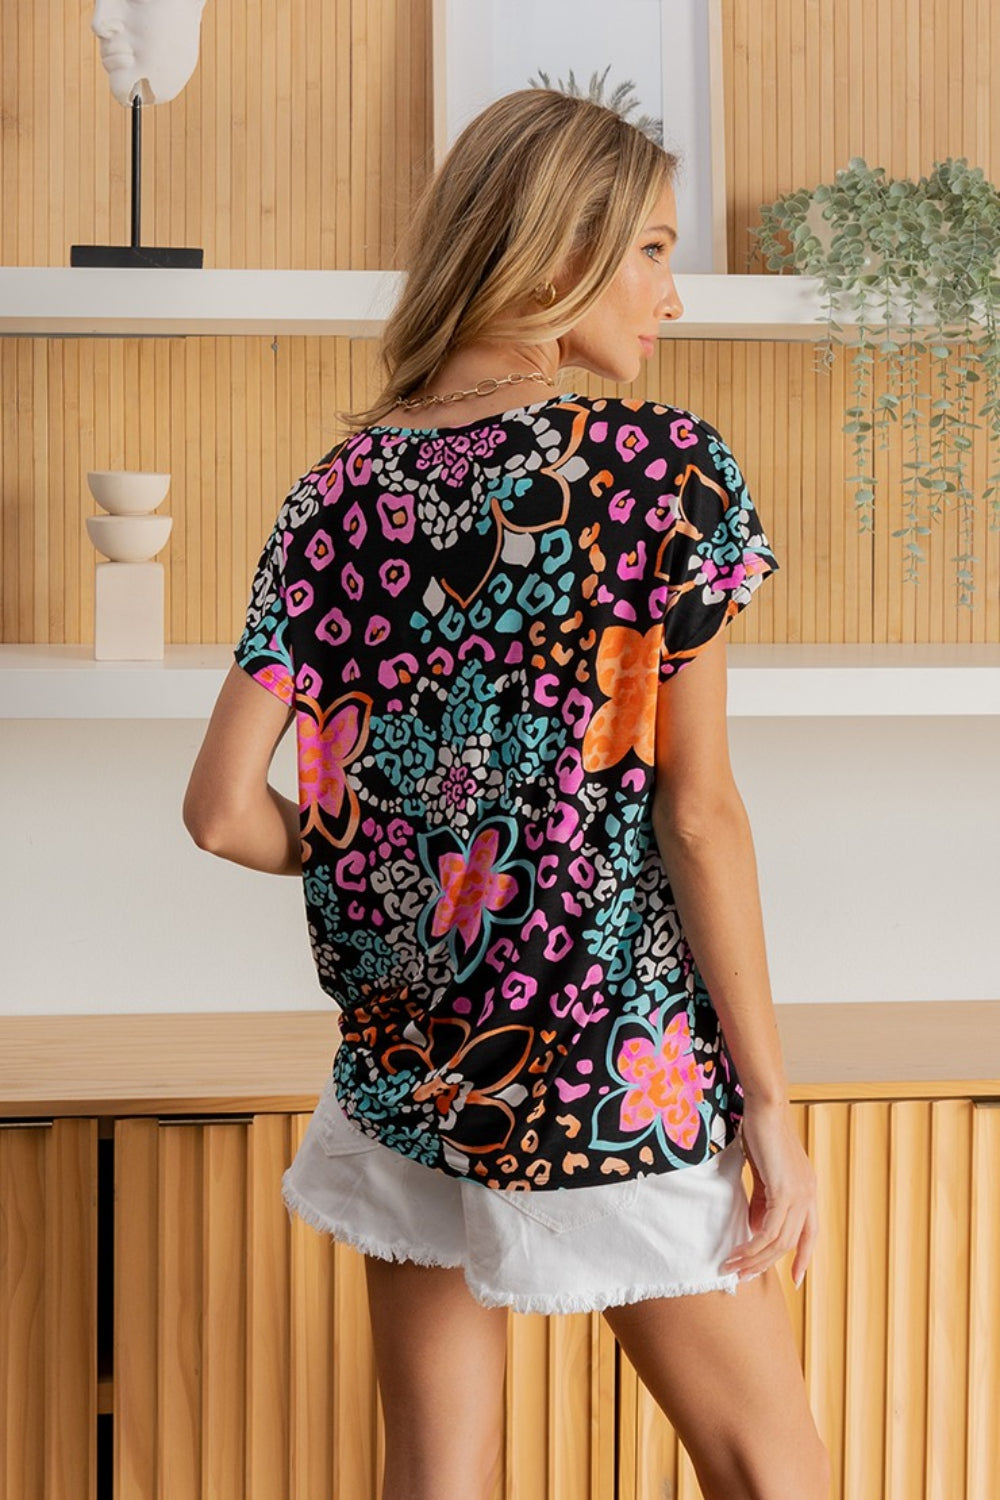 Full Bloom Top             sizes small to 3xl